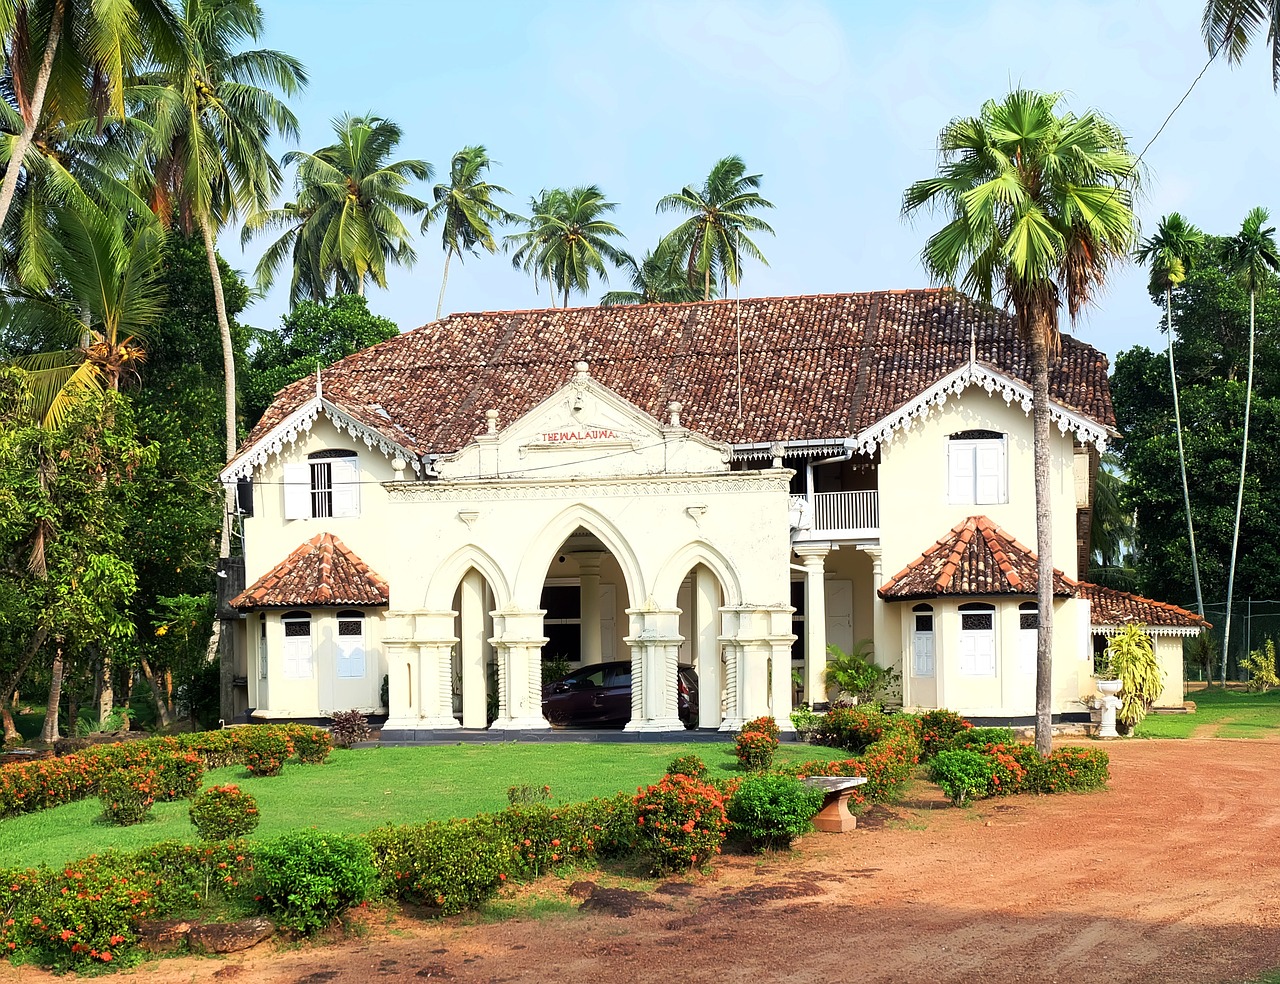 a large white building sitting on top of a lush green field, by Max Dauthendey, shutterstock, hurufiyya, colonial house in background, high arches, well decorated, !!highly detalied